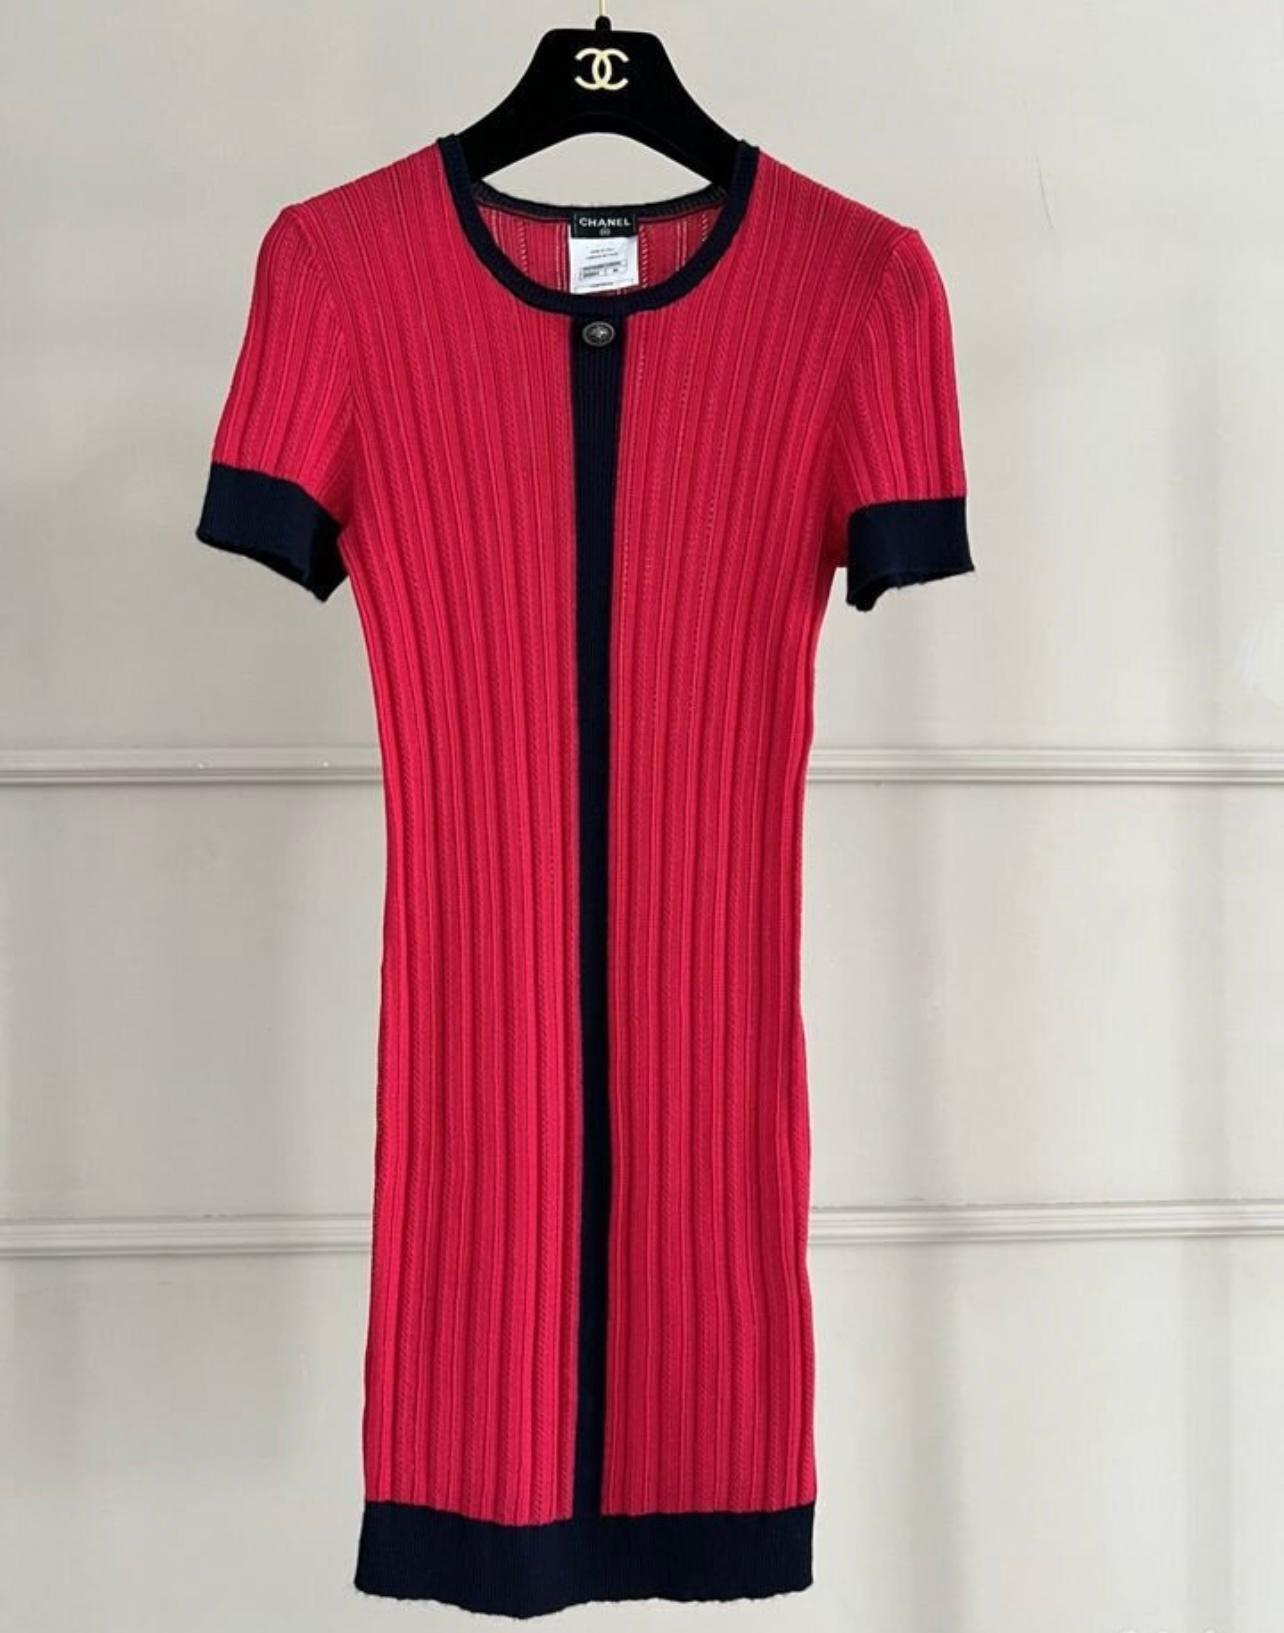 Chanel Red and Black CC Charm wonderful Dress.
Size mark 36 FR, pristine condition